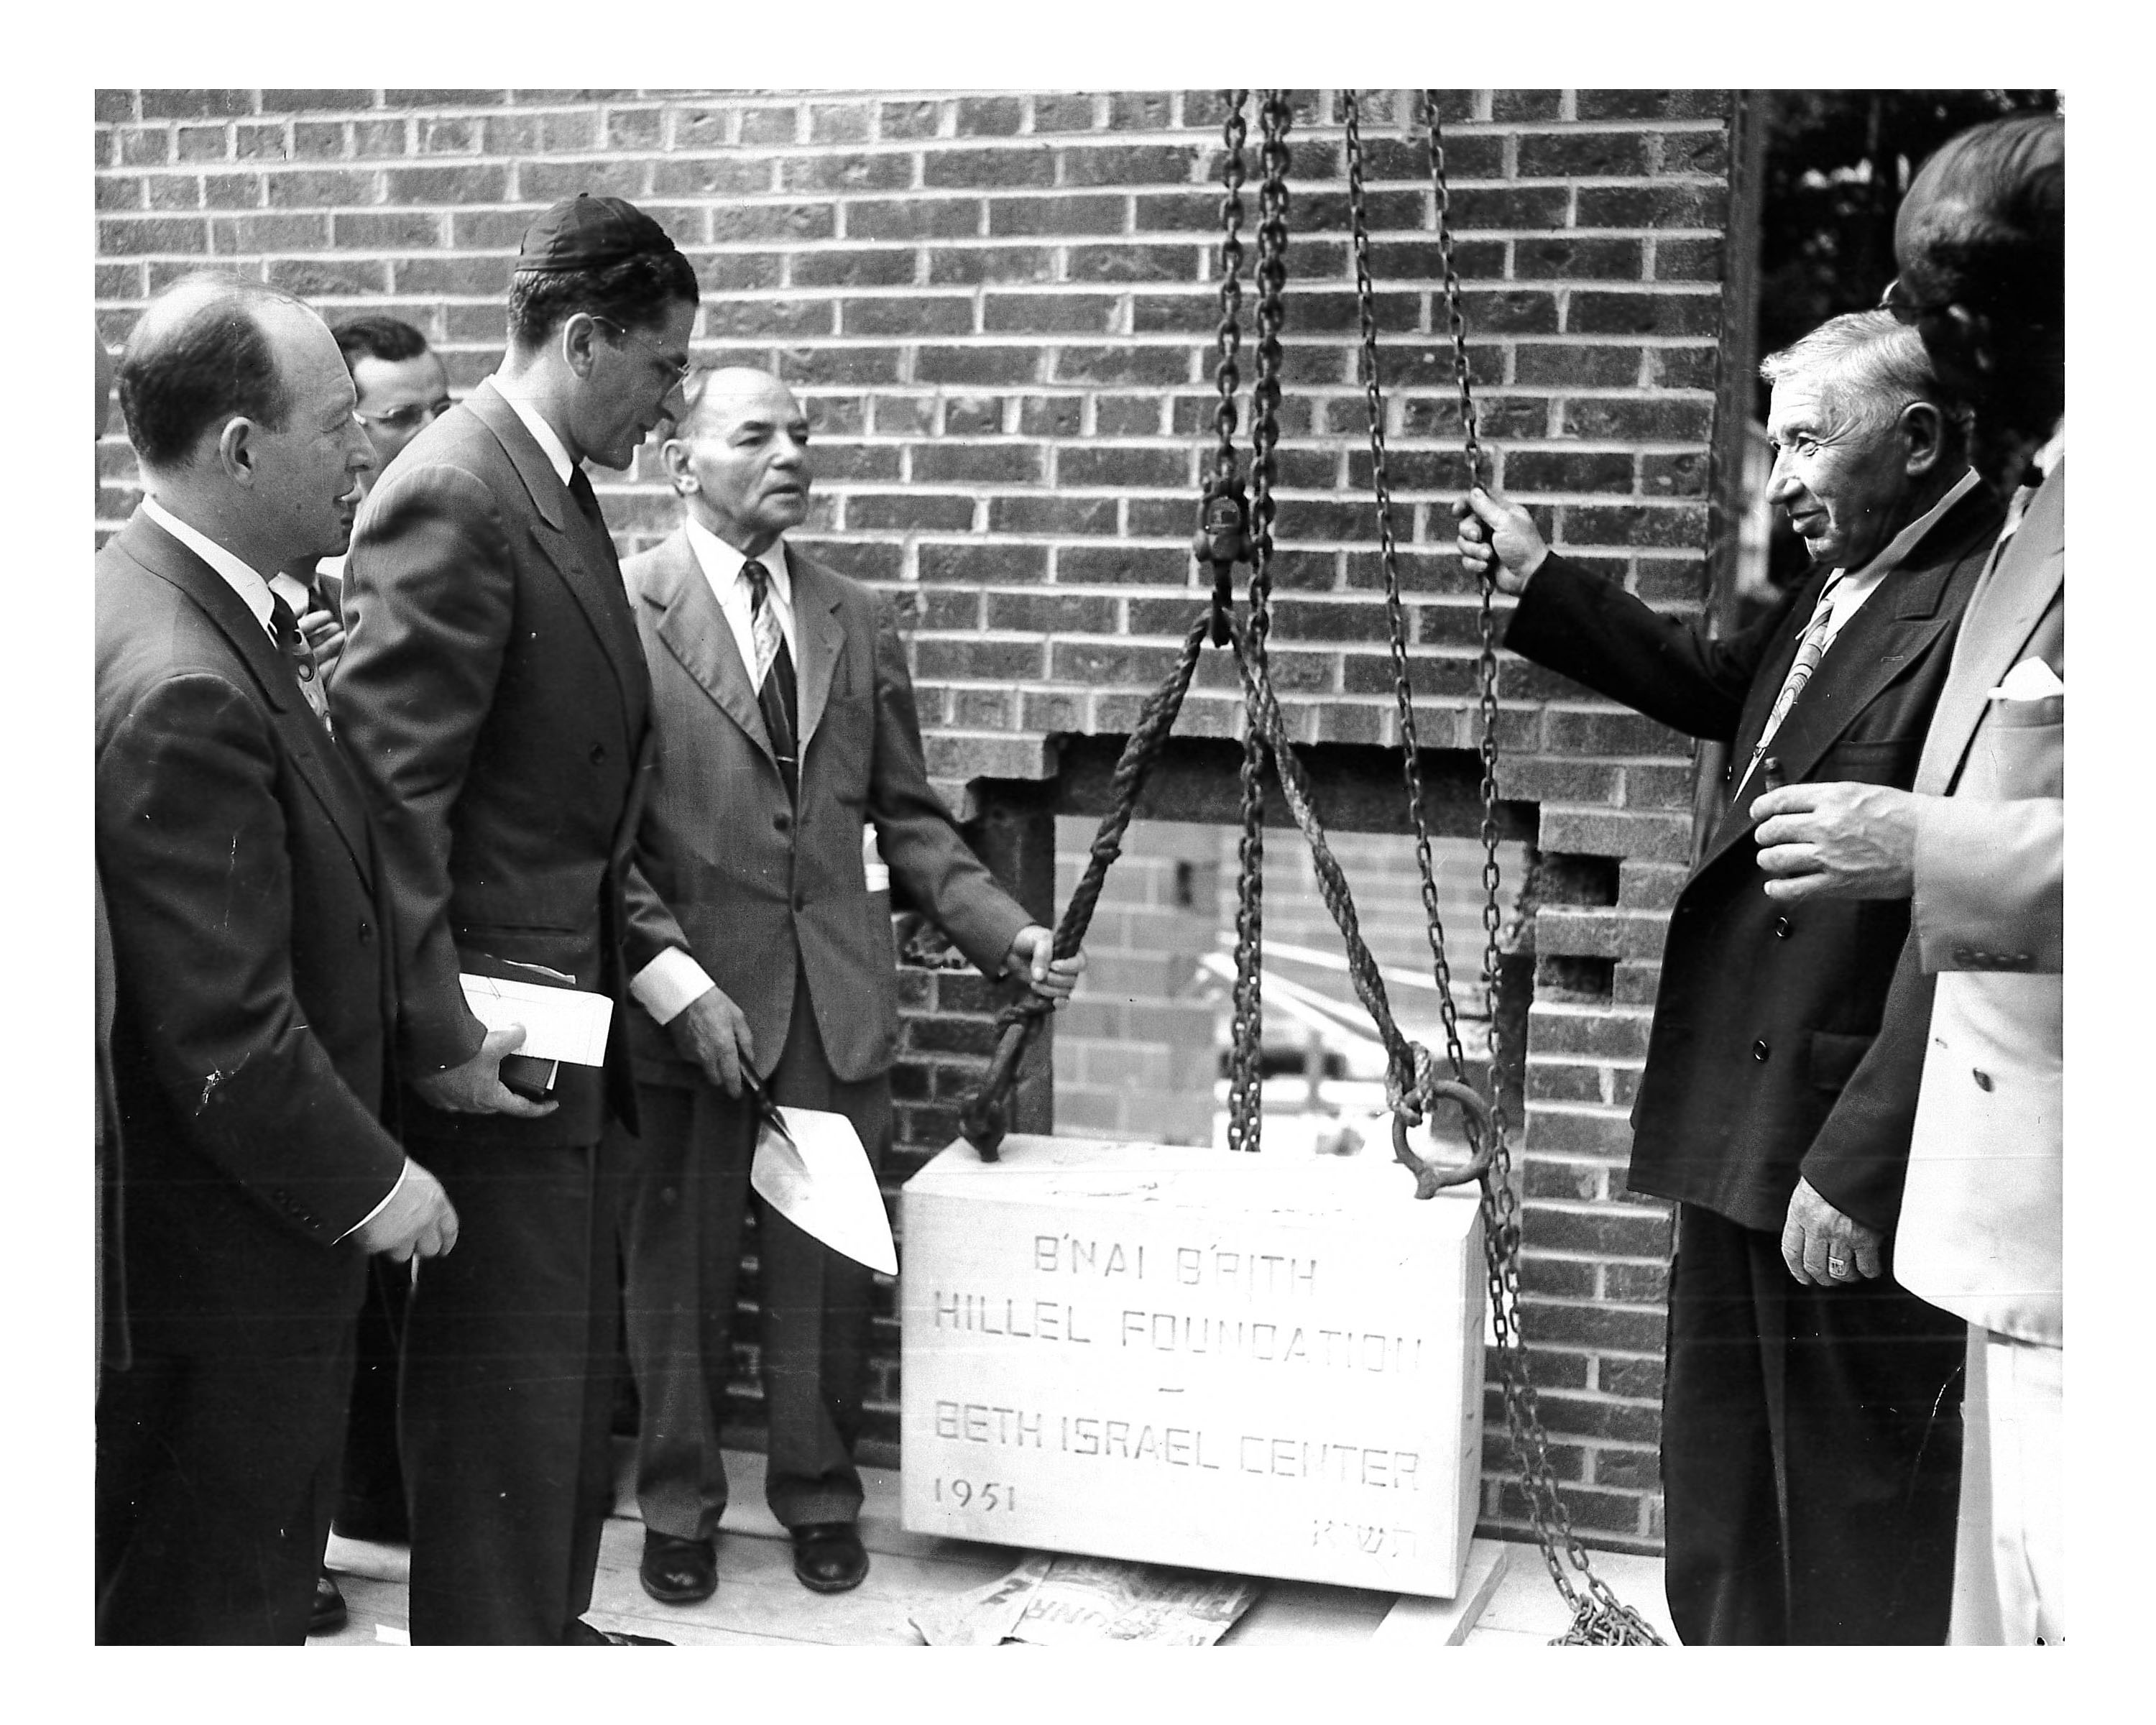 Laying the cornerstone, 1429 Hill Street, 1951. Herb Schlager (left), Rabbi Herschel Lyman (tall man), Osias Zwerdling (holding the rope), Tom Cook (holding the chain).